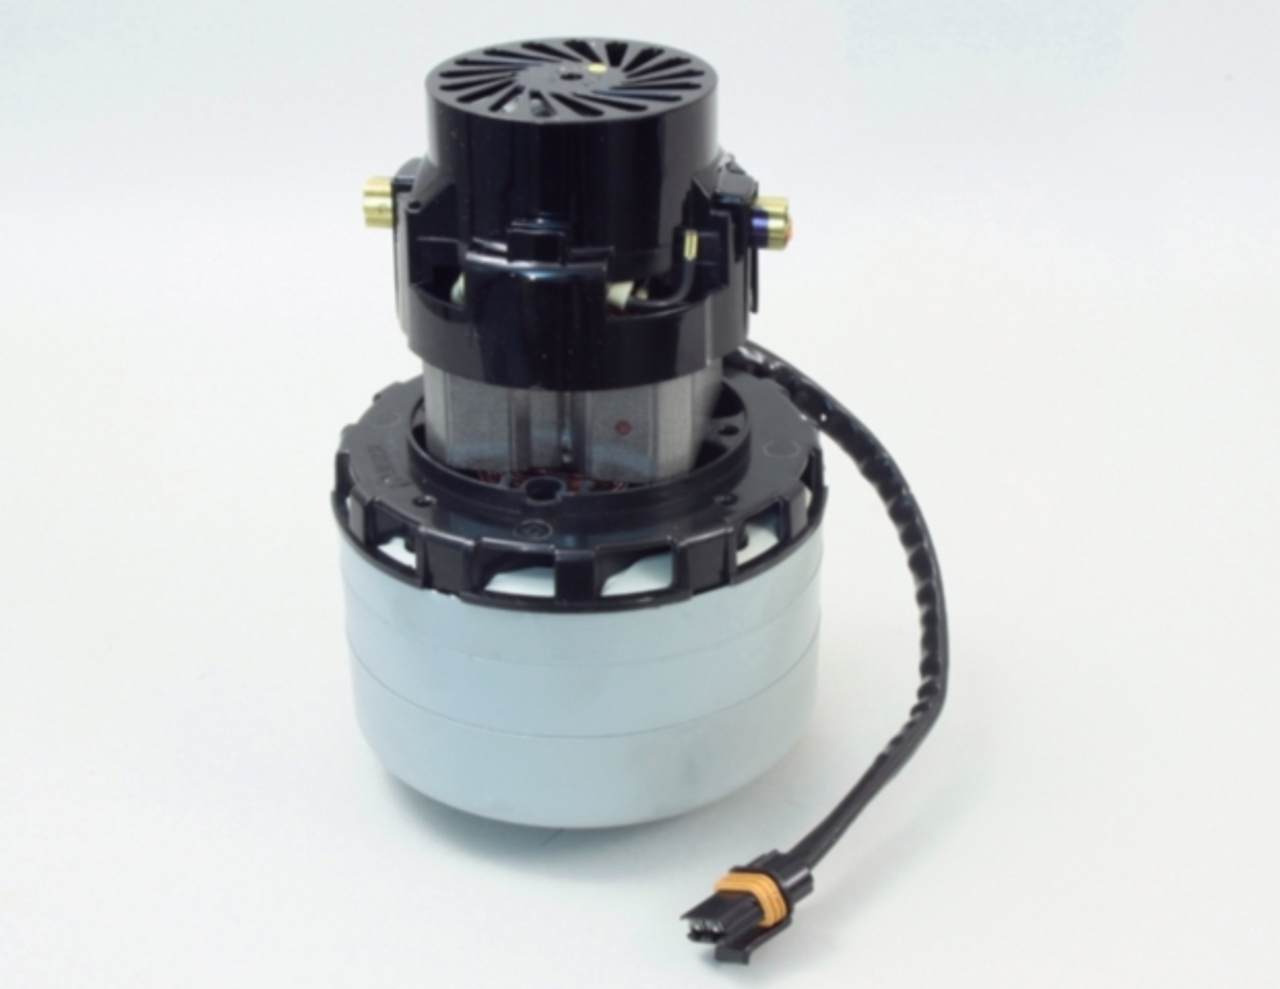 56317025: Viper Industrial Products Aftermarket Motor Vac 24VDC